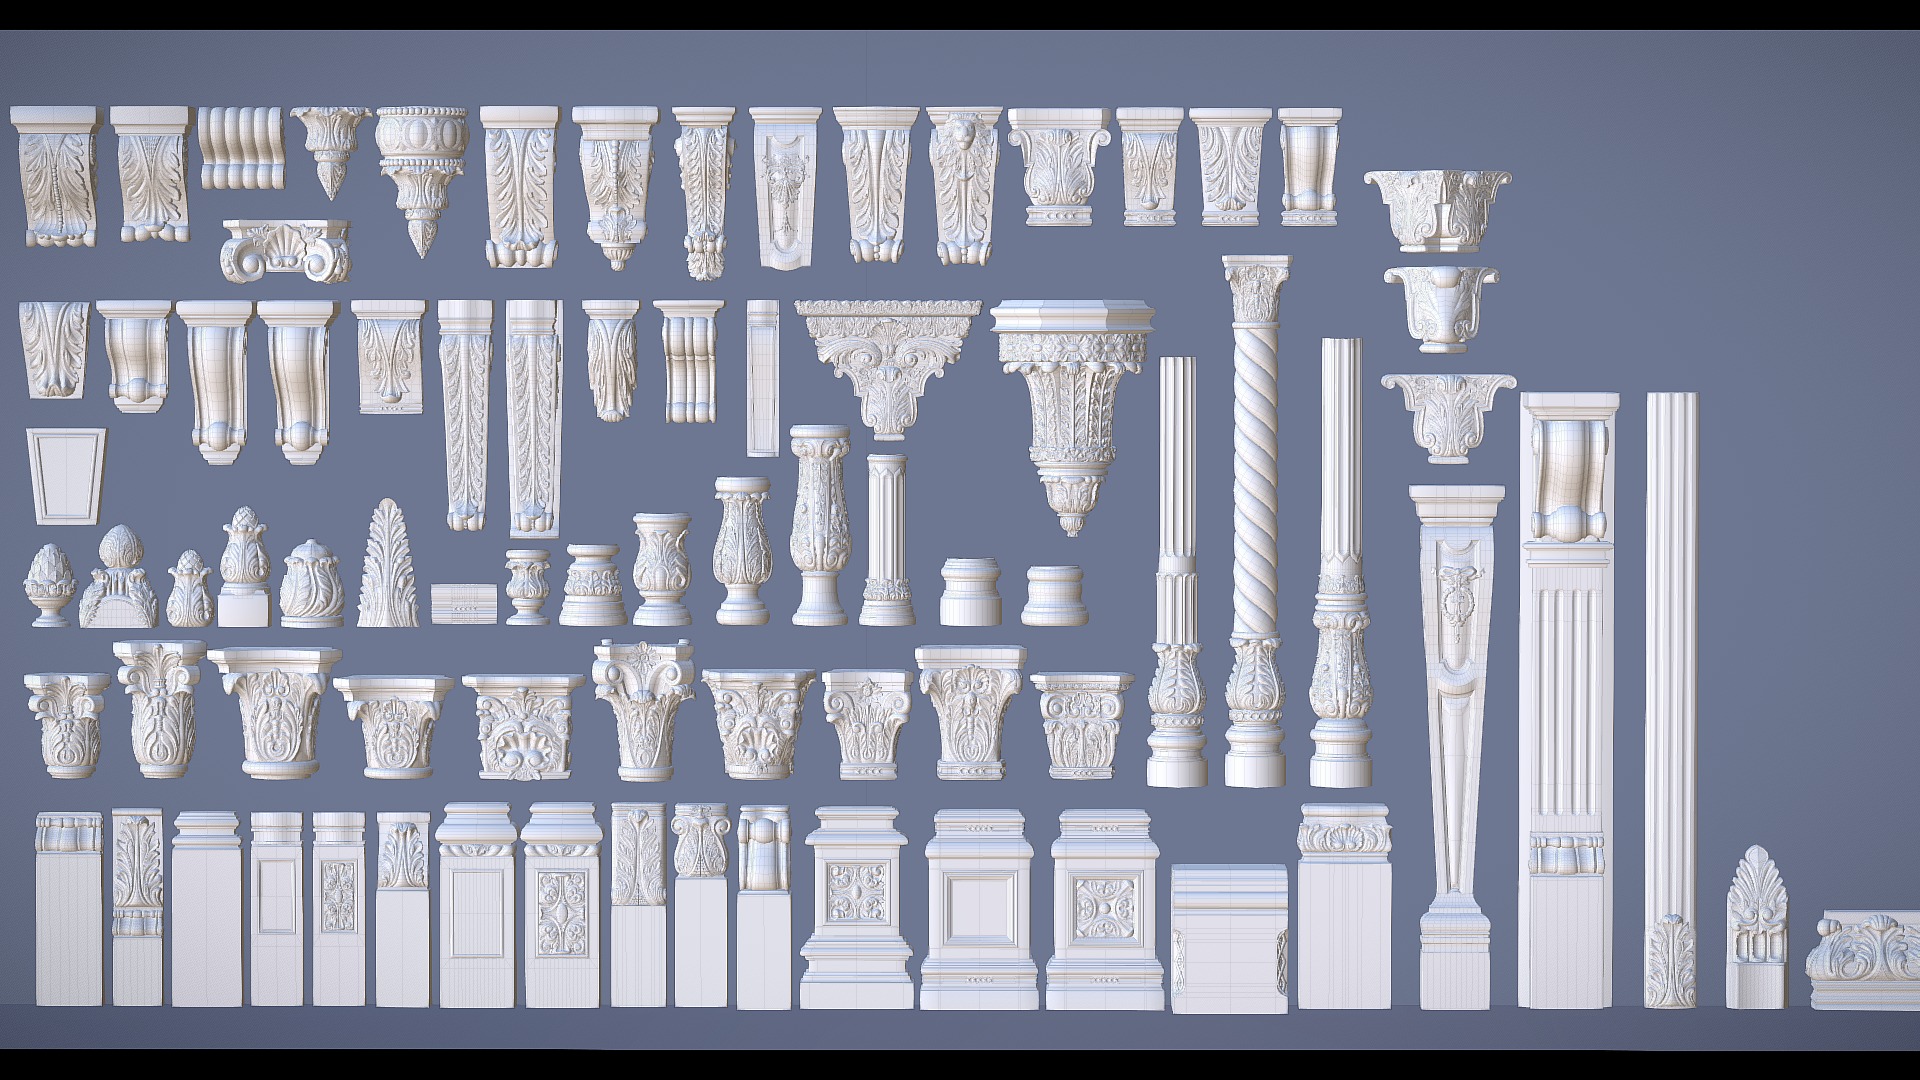 3D model 1D Pearlworks elements Showcase (80 items) - This is a 3D model of the 1D Pearlworks elements Showcase (80 items). The 3D model is about a wall with many vases on it.